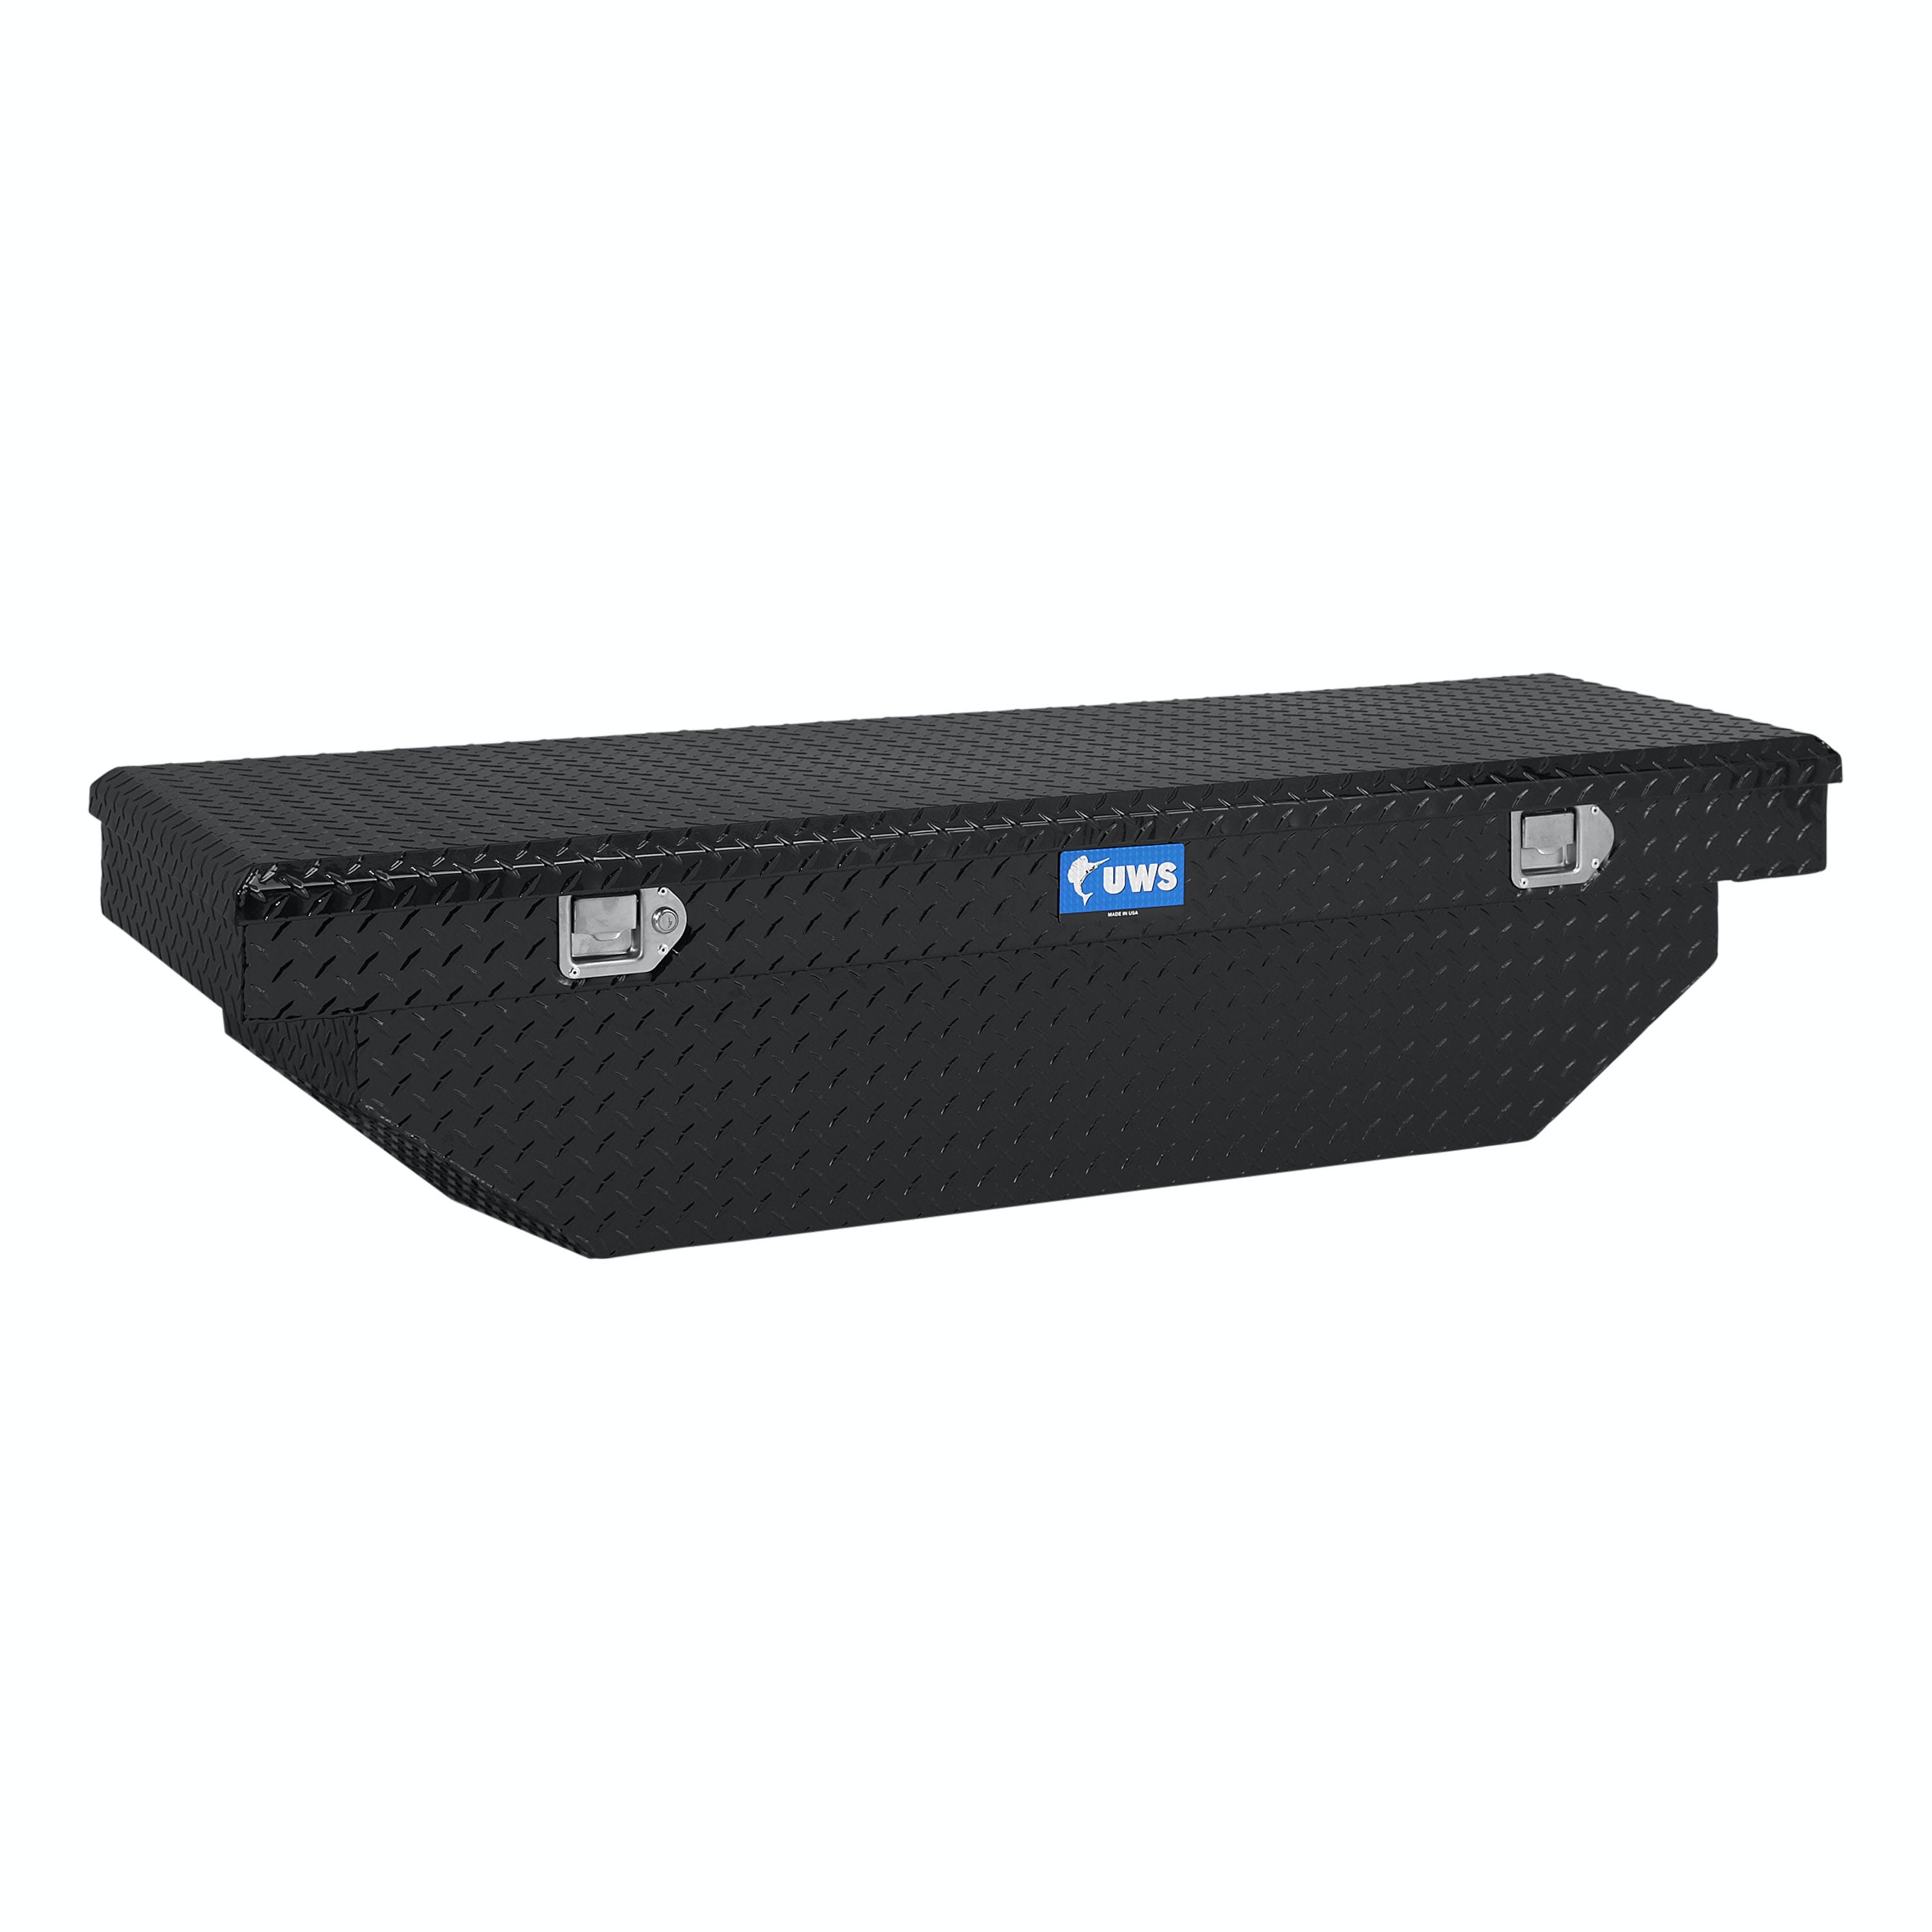 UWS TBS-60-A-BLK 60 inch Aluminum Single Lid Crossover Toolbox Angled Black